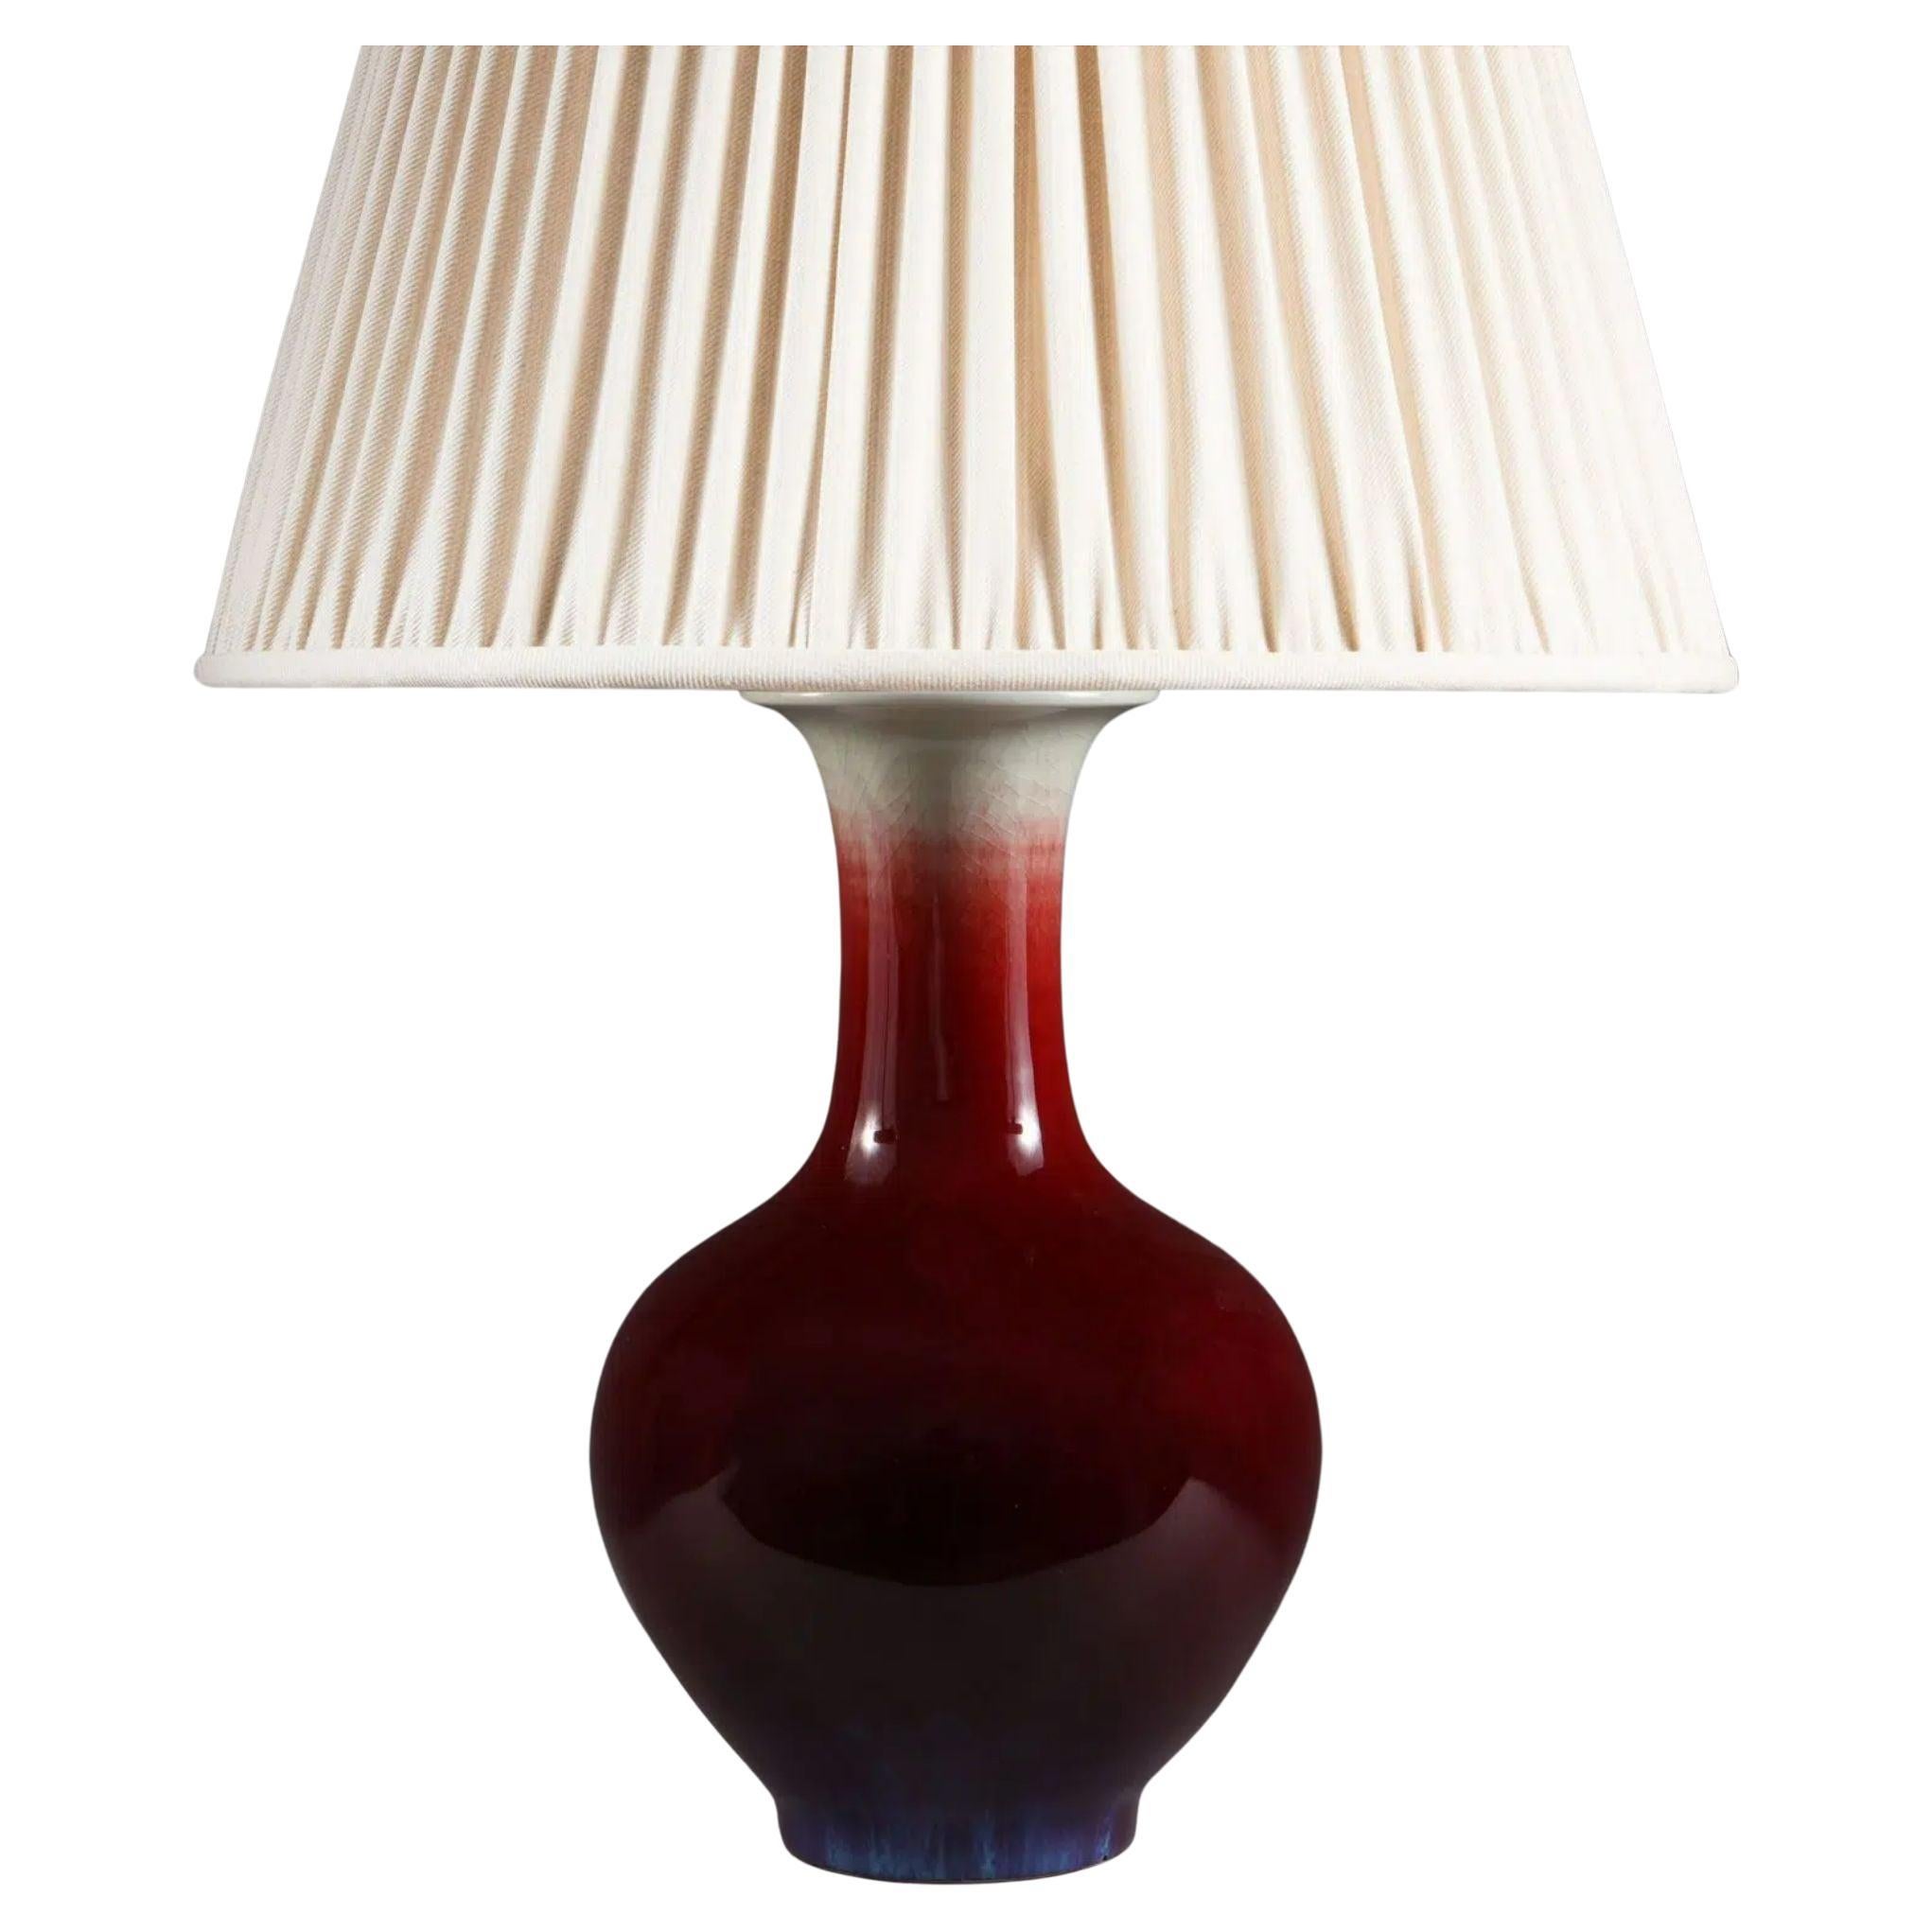 Chinese Sang De Boeuf Vase Mounted as a Table Lamp, 20th Century